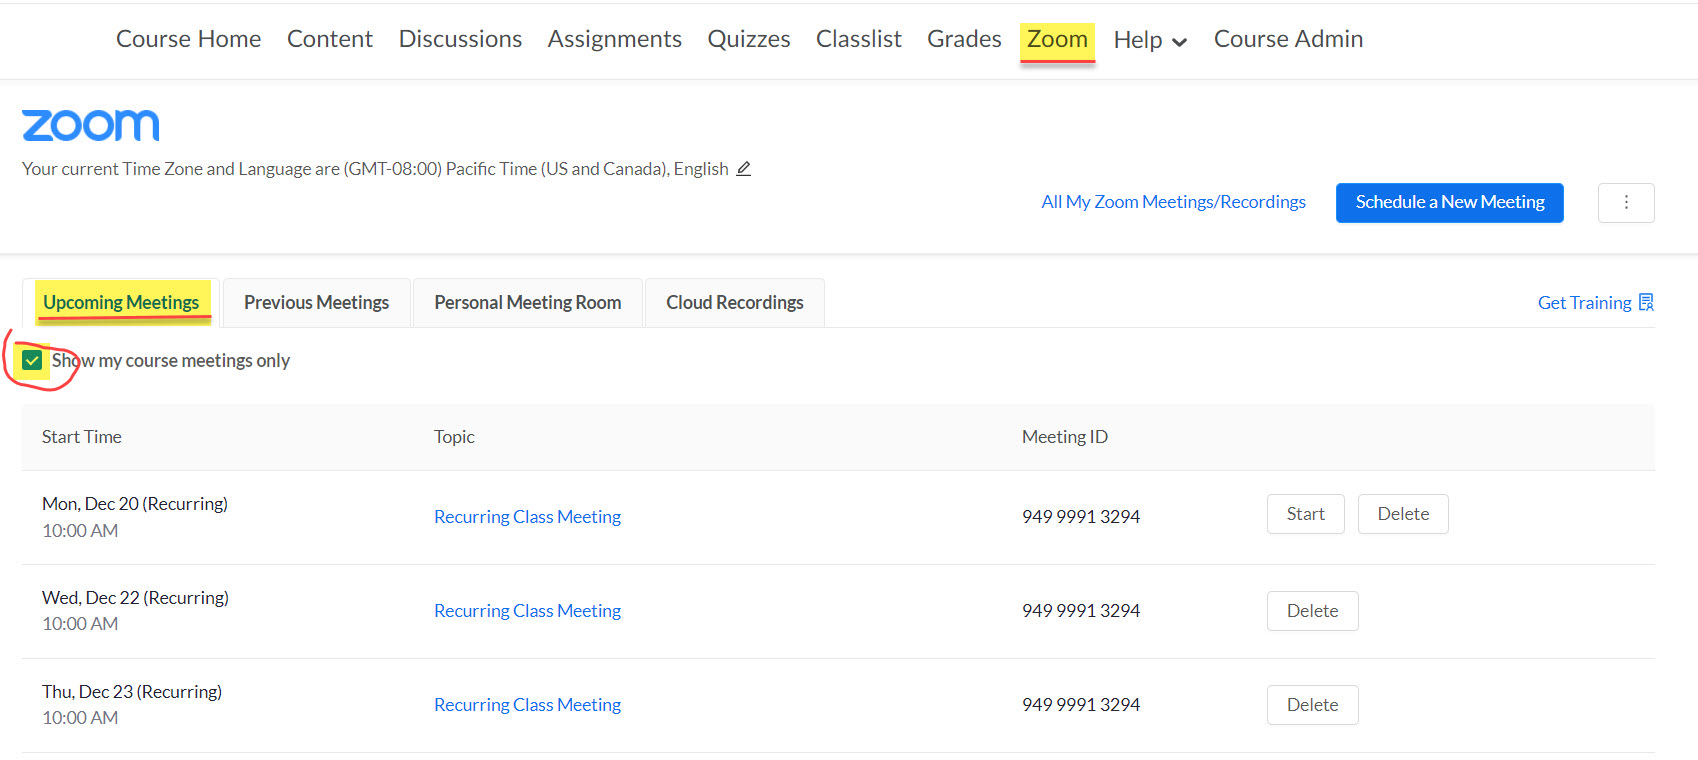 Zoom Upcoming Meetings tab with Show my course meetings only checked